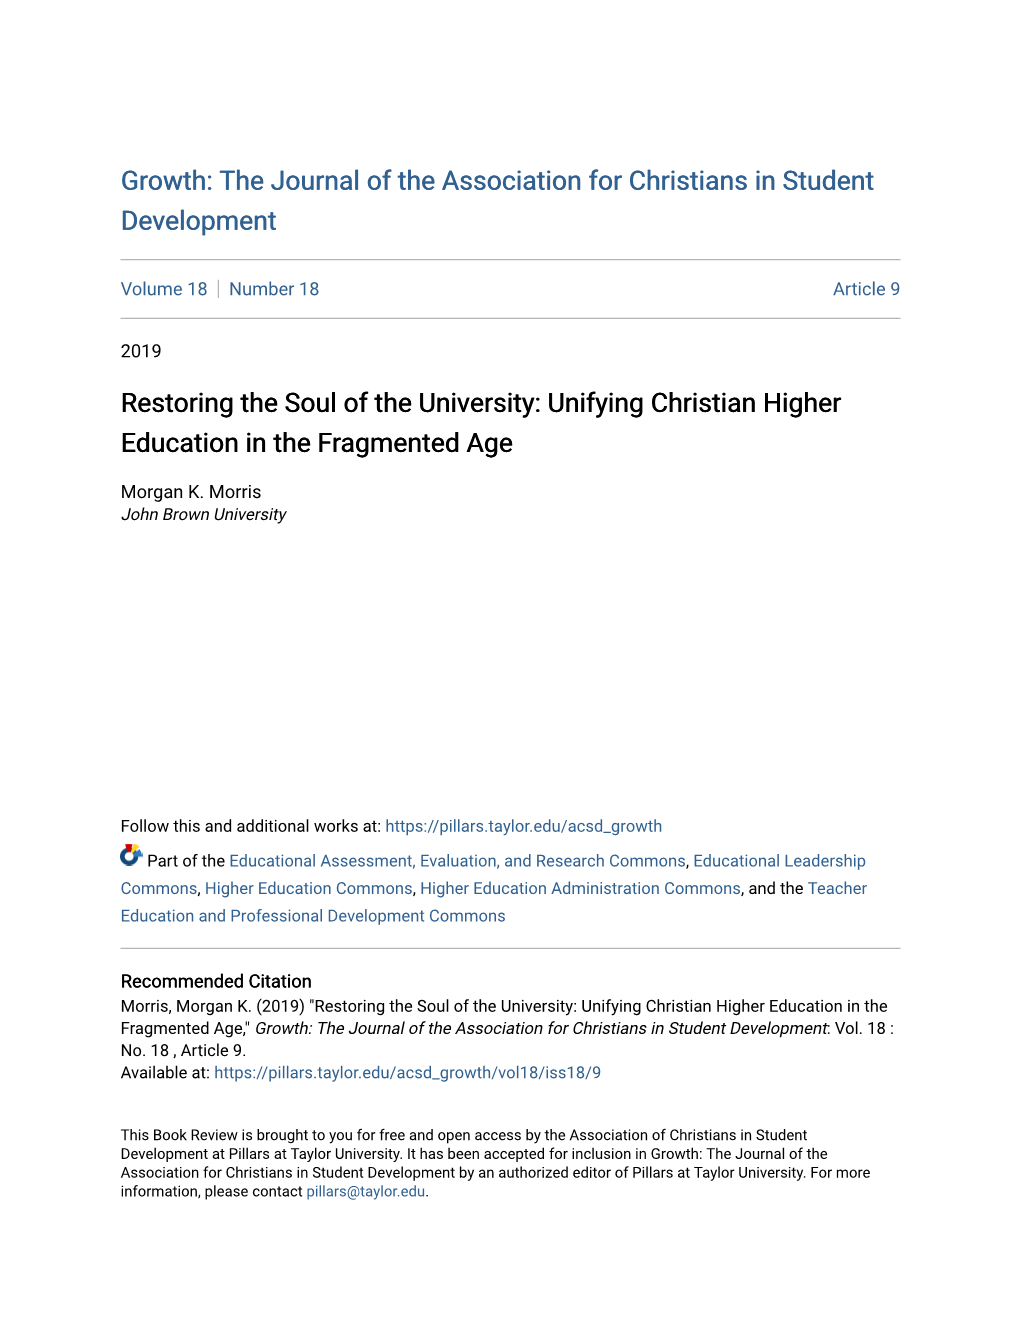 Restoring the Soul of the University: Unifying Christian Higher Education in the Fragmented Age